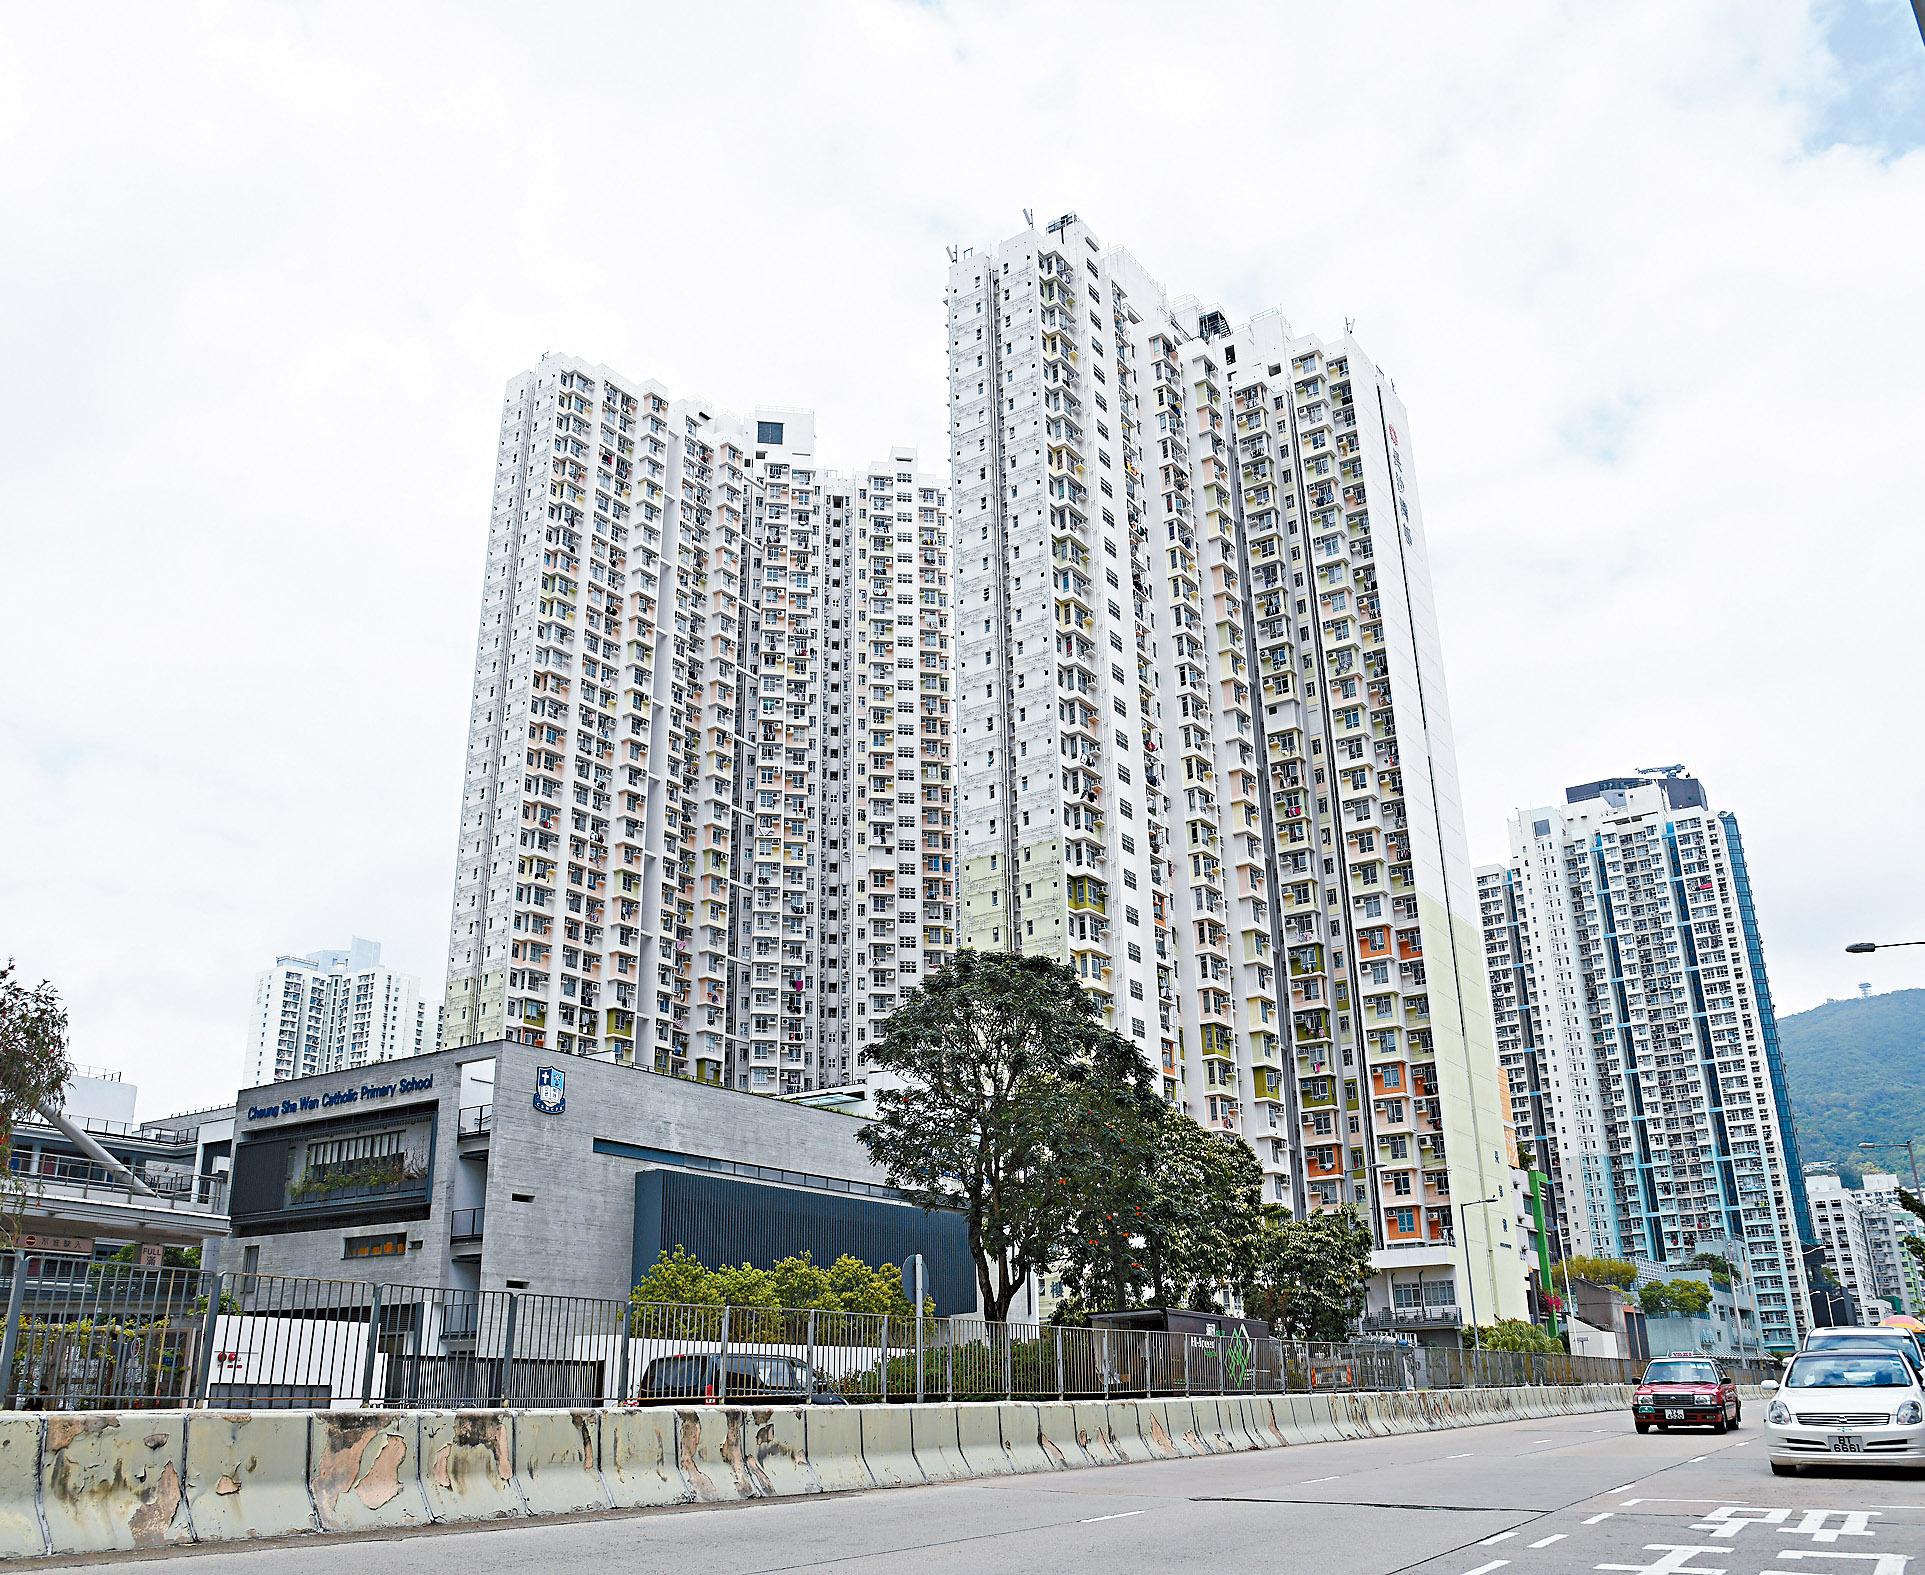 The Hong Kong Housing Authority (HA) organised the Estate Management Services Contractors Awards 2021 to recognise the outstanding performance of its services contractors in managing the HA's properties in the previous year. The estate managed by the winner of the "Best Public Rental Housing Estate (Property Services) (Small Estate)" award is Cheung Sha Wan Estate.